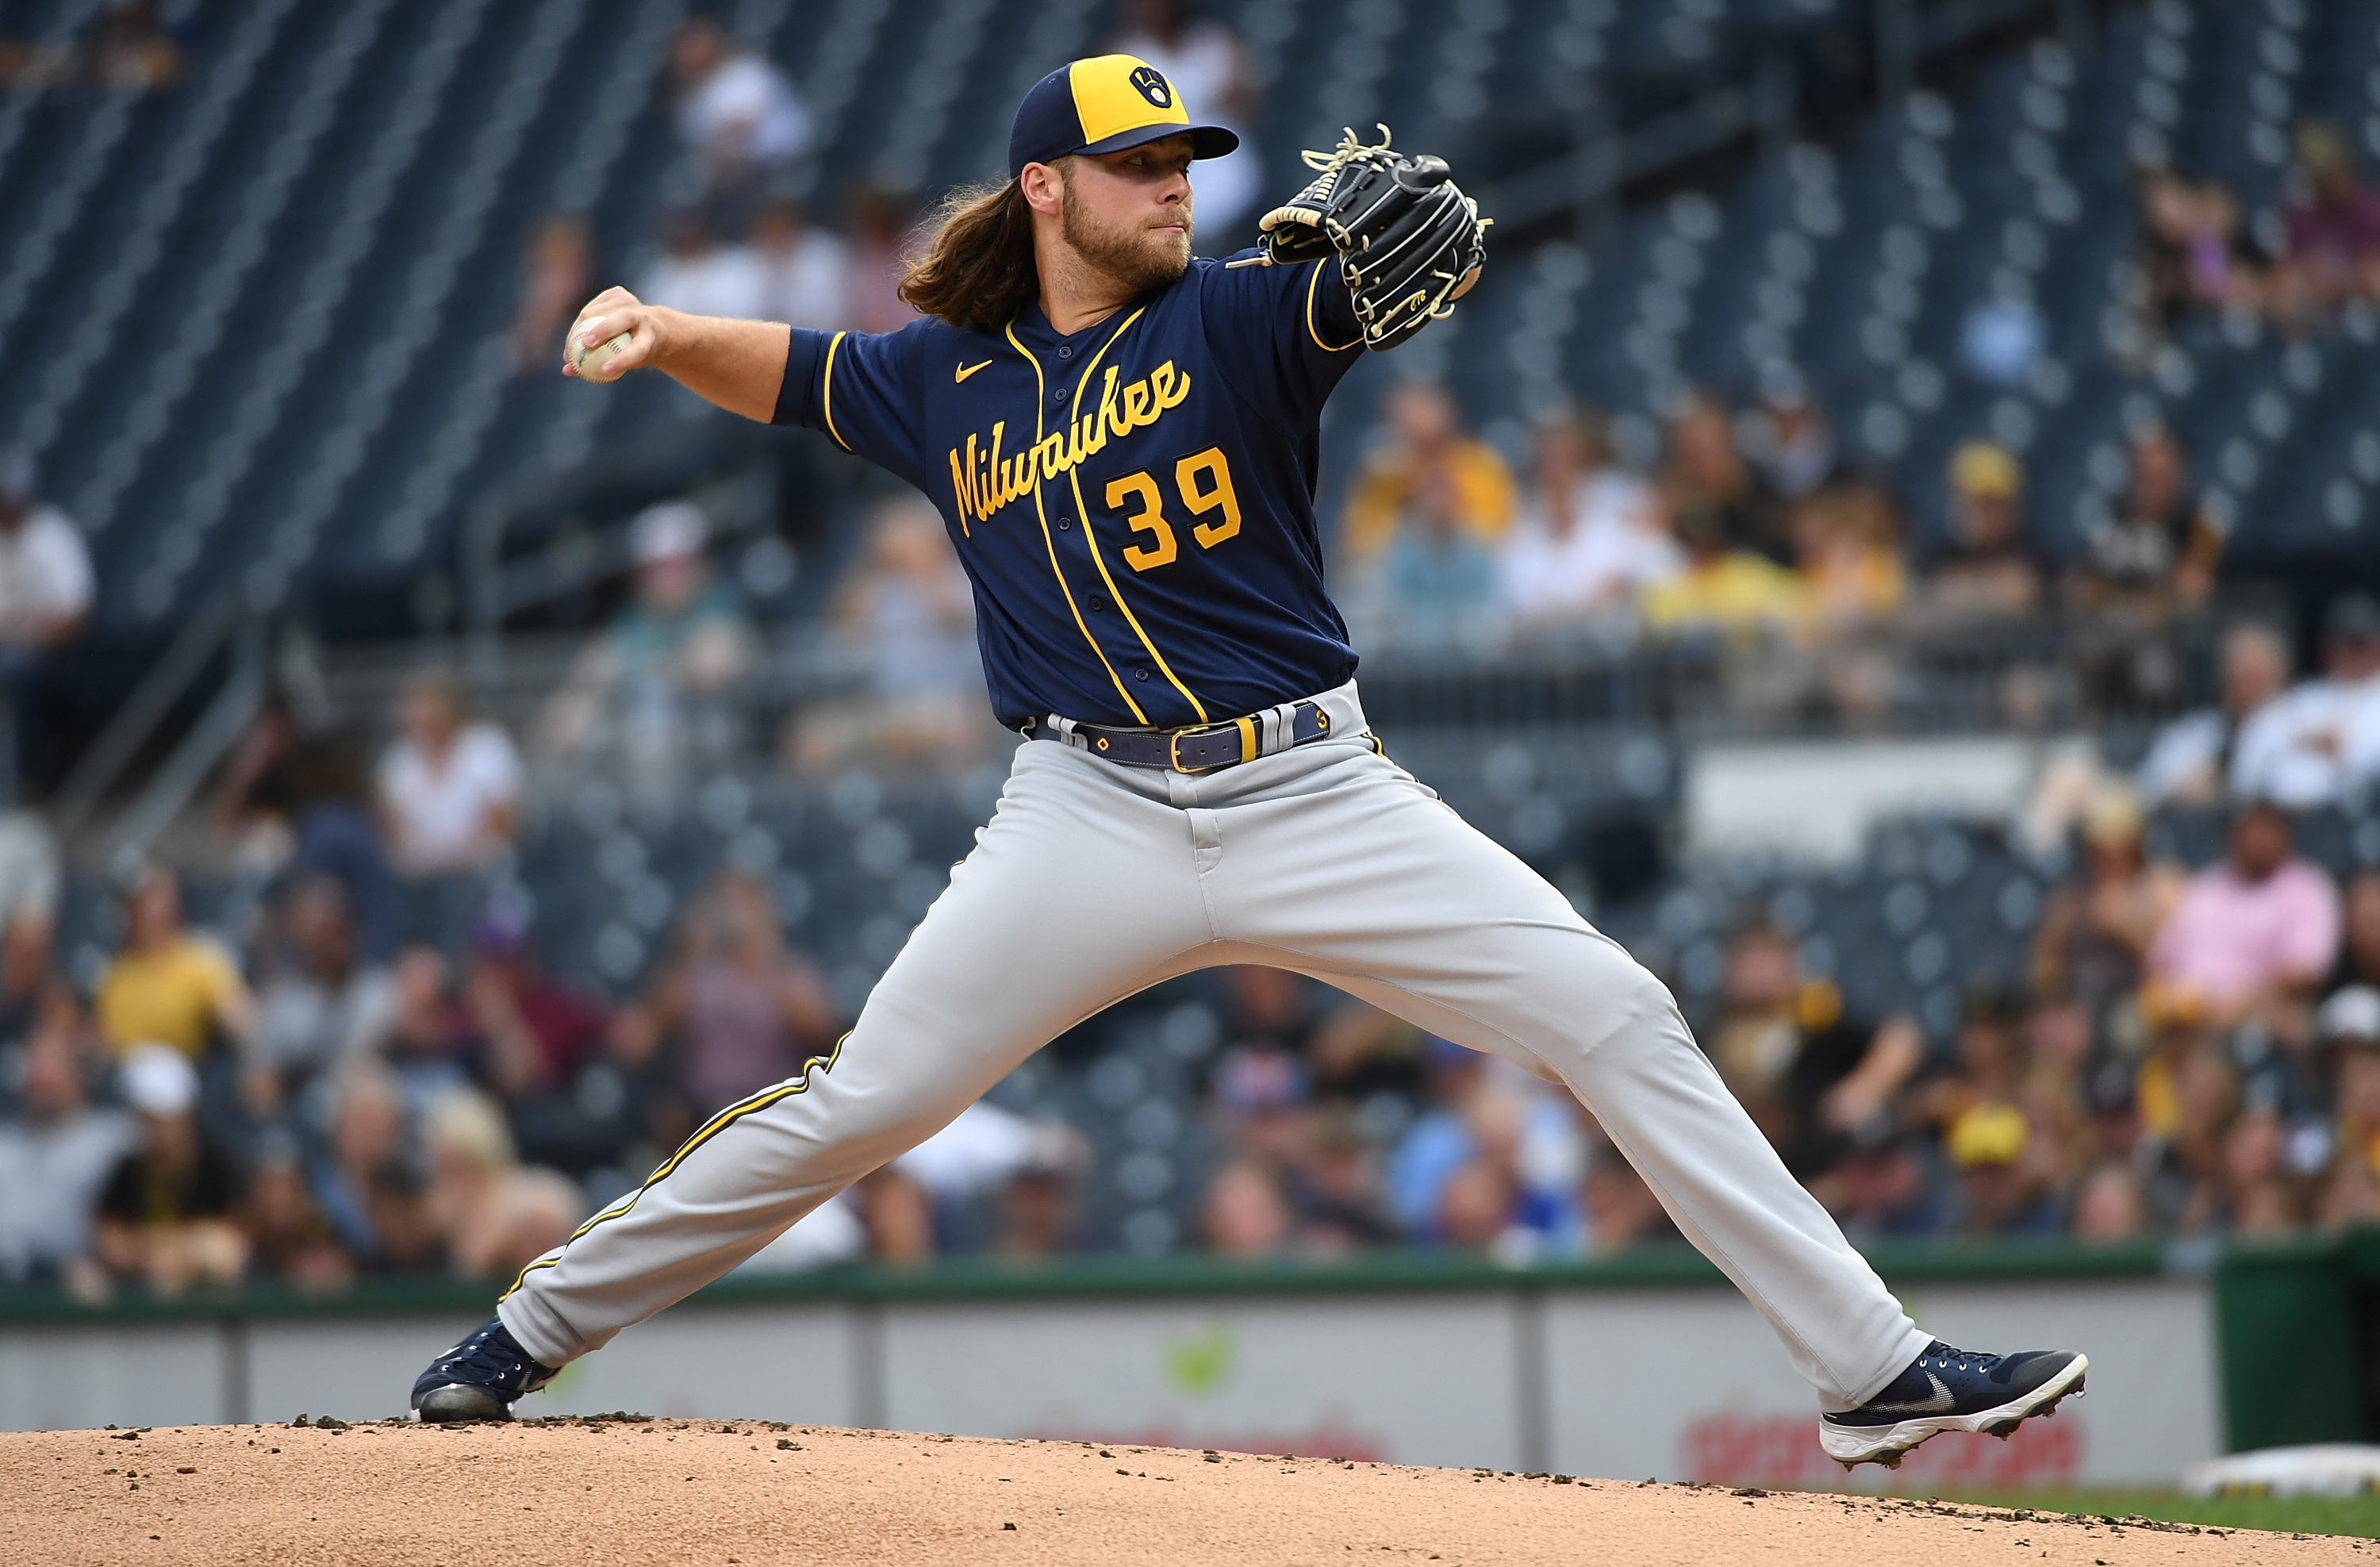 Corbin Burnes #39 of the Milwaukee Brewers delivers a pitch in the first inning during the game against the Pittsburgh Pirates at PNC Park on August 2, 2022 in Pittsburgh, Pennsylvania.